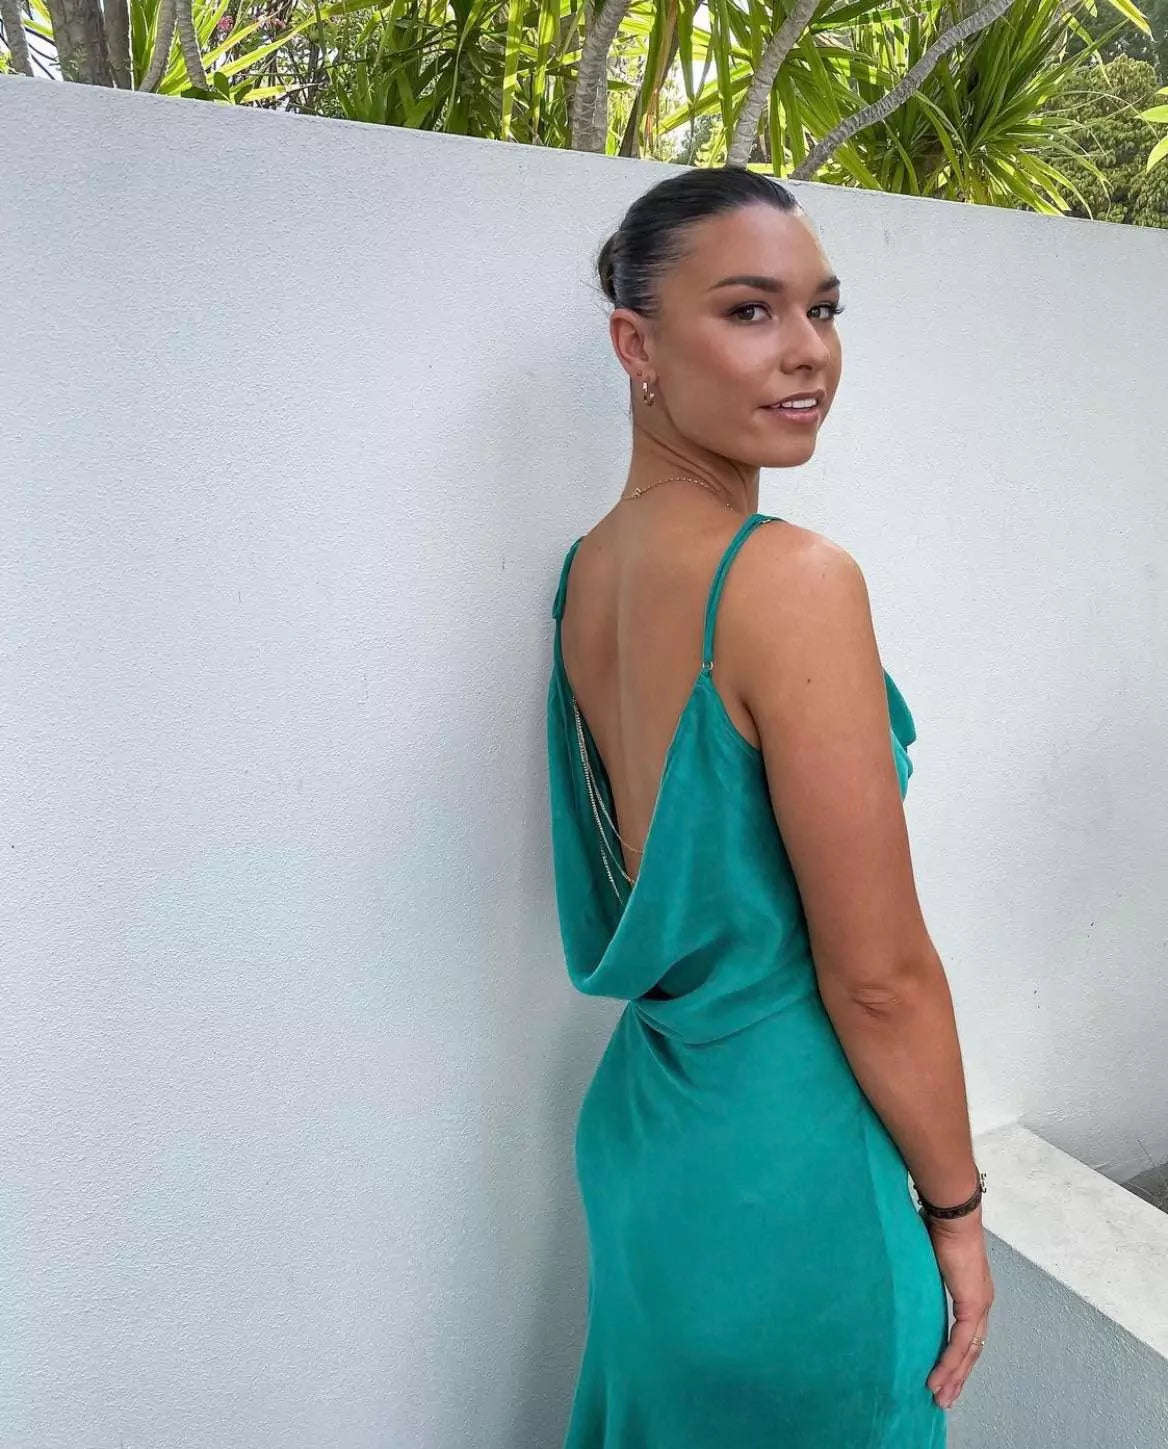 A woman in a green dress posing against a wall.